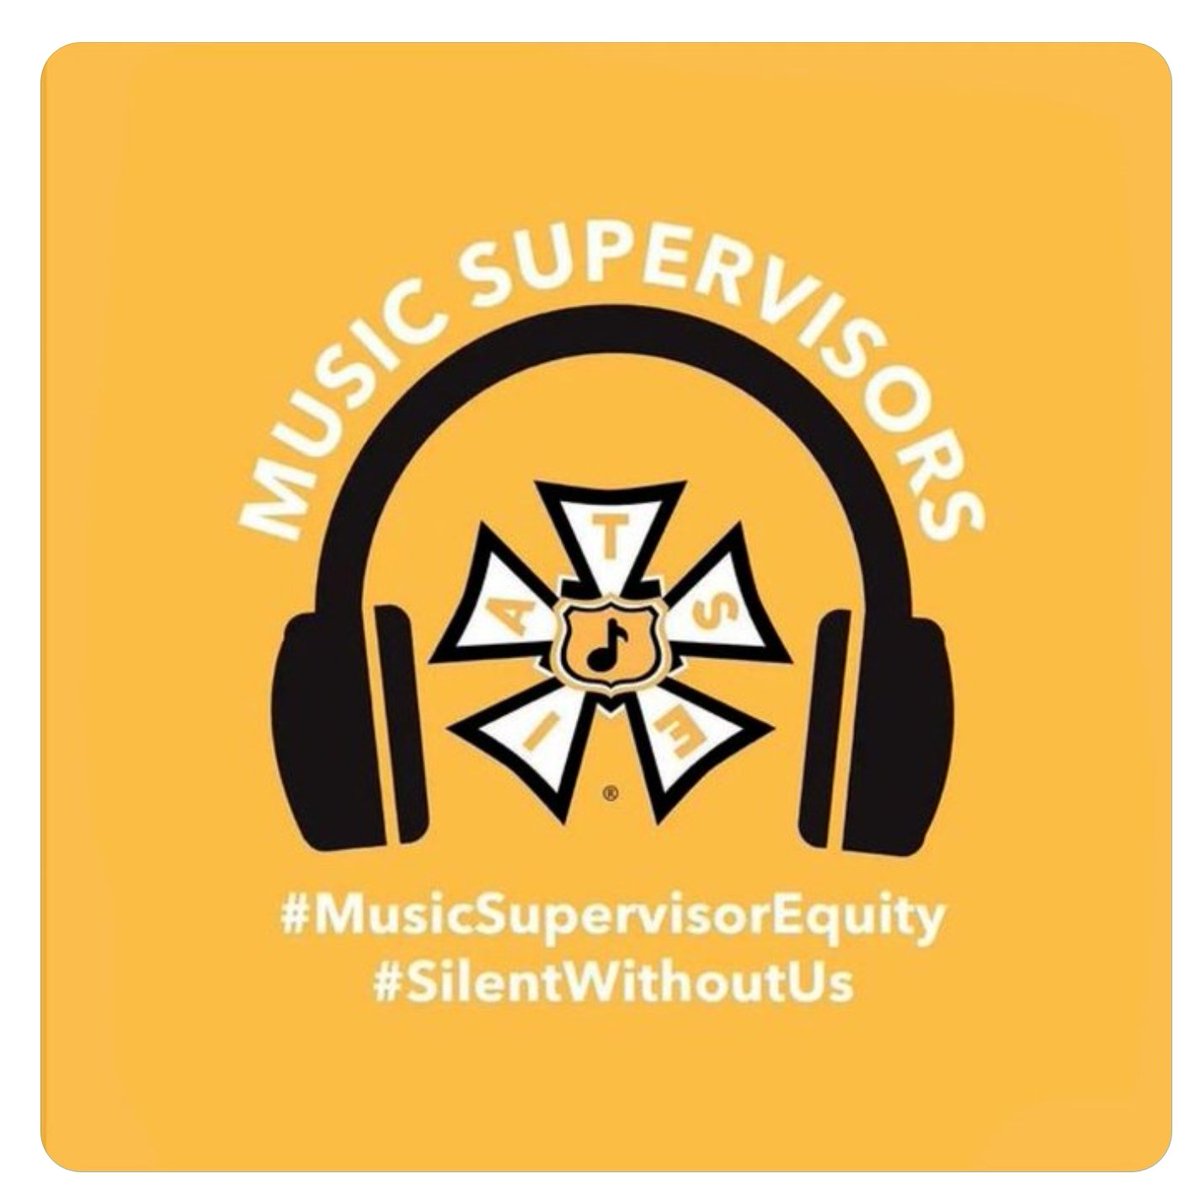 .
Music Supervisors made a difference in so many musicians lives.. becoming unionized will make a difference in theirs..

#MusicSupervisorEquity 
#SilentWithoutUs